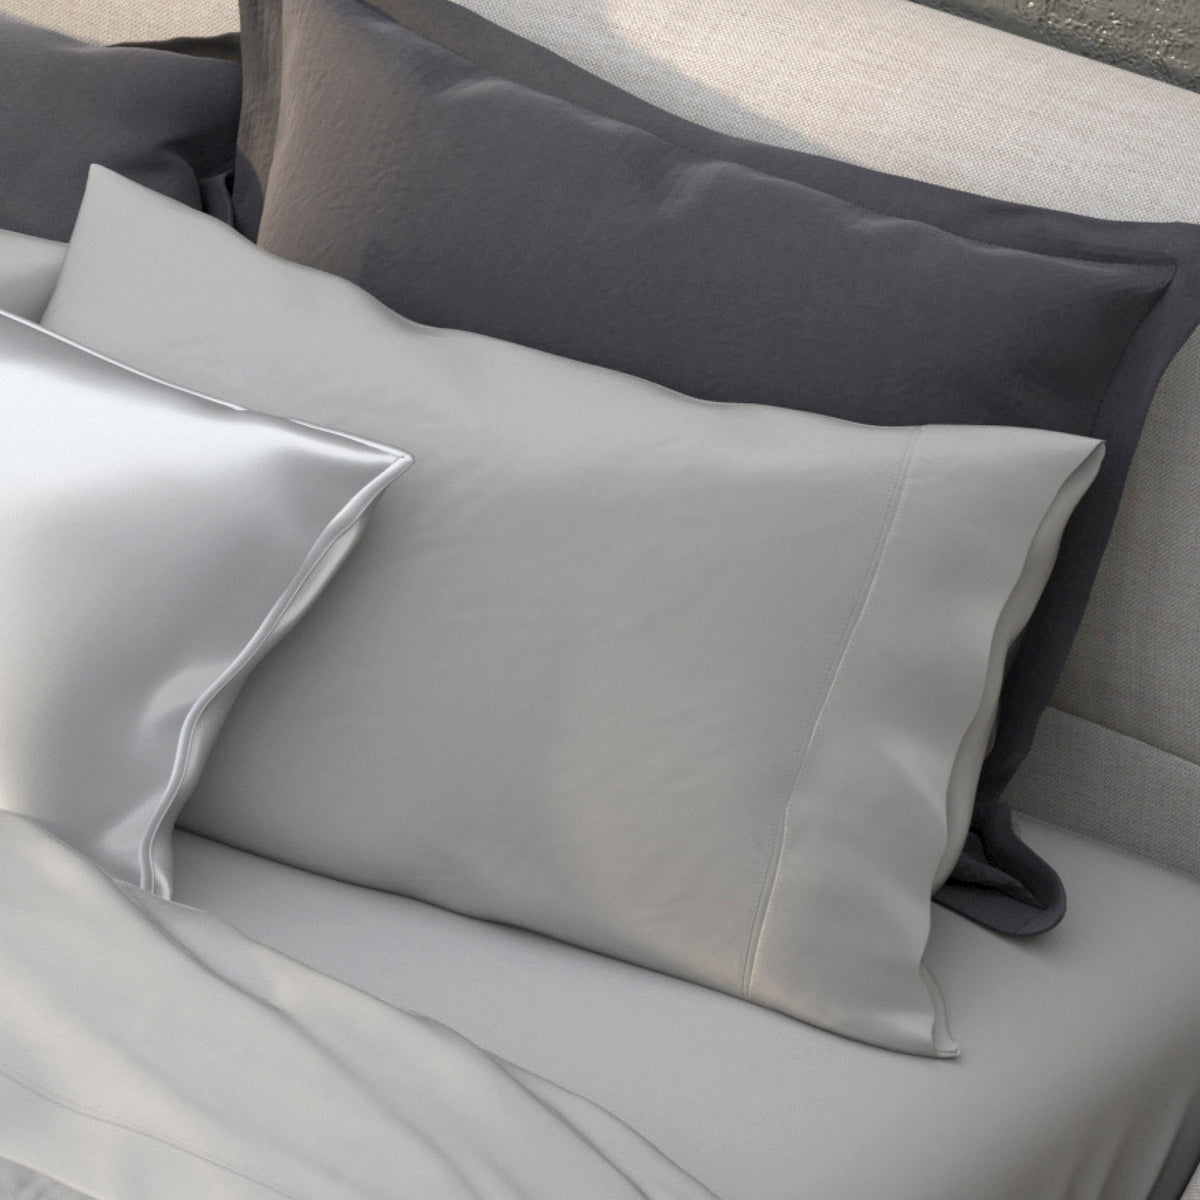 Image of various pillows on a bed in shades of gray with the middle one showcasing the Dove Gray Recovery Viscose Pillowcase